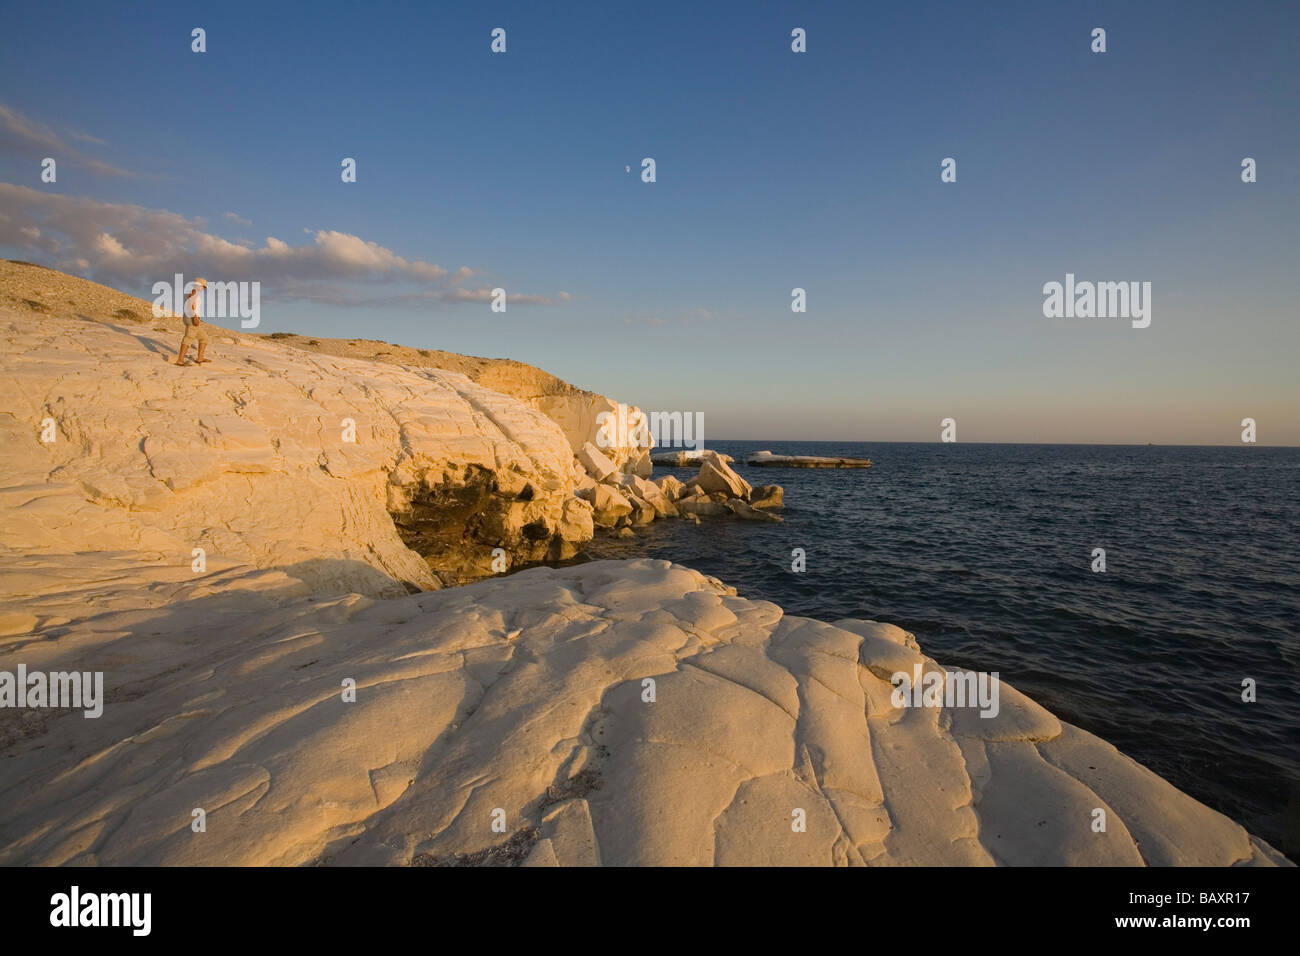 White rocks along the coast at Governors Beach, at sunset, near Lemesos, near Limassol, South Cyprus, Cyprus Stock Photo